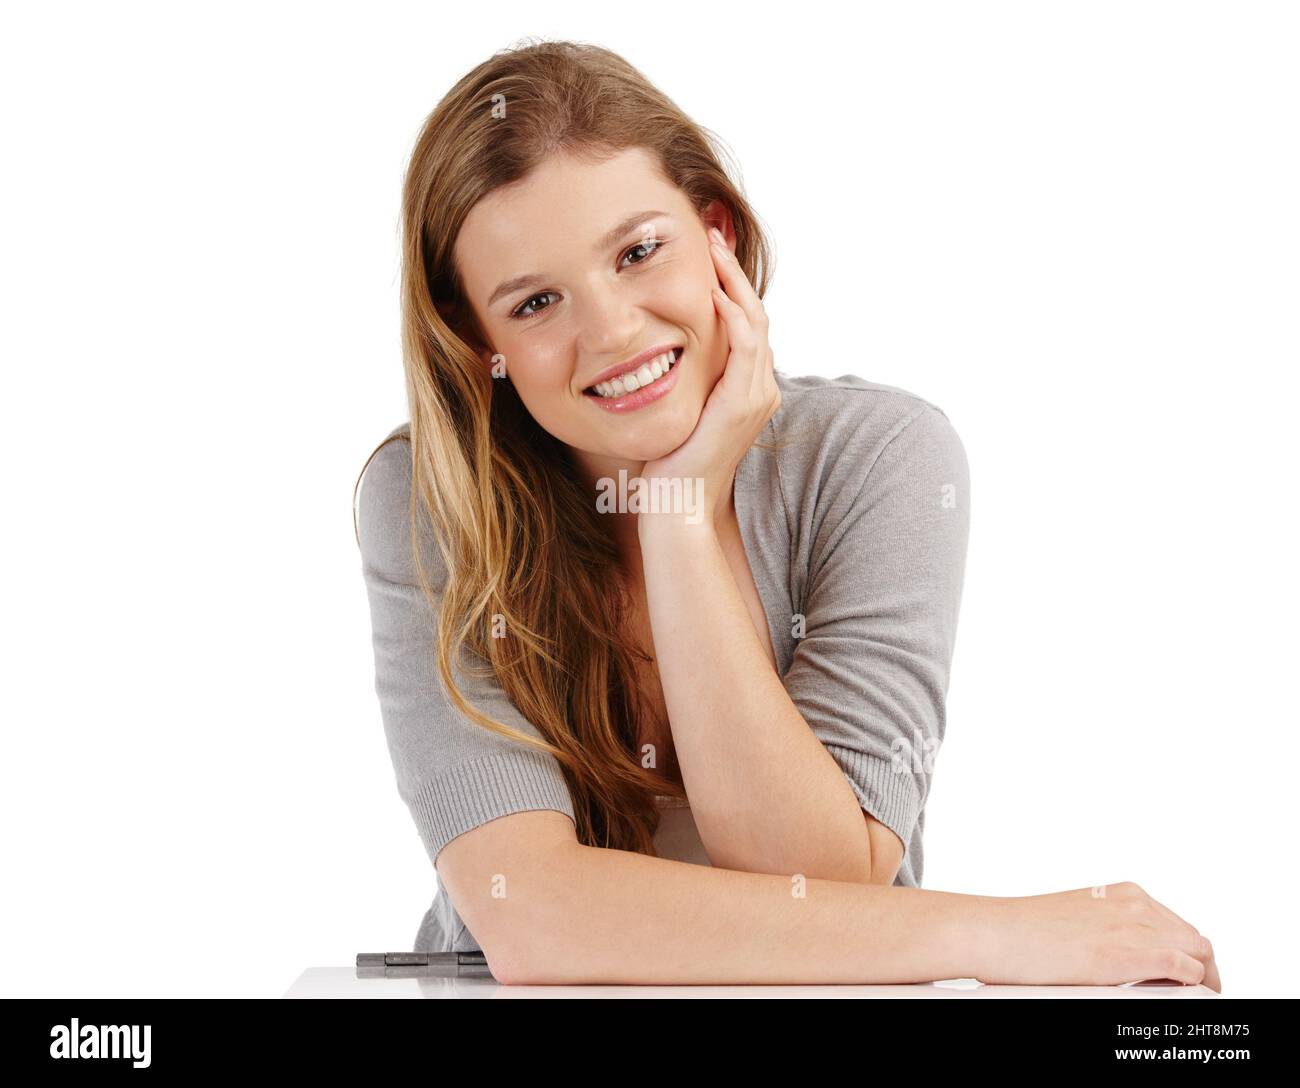 Happy and content. Studio portrait of an attractive young woman with her head on her hand against a white background. Stock Photo